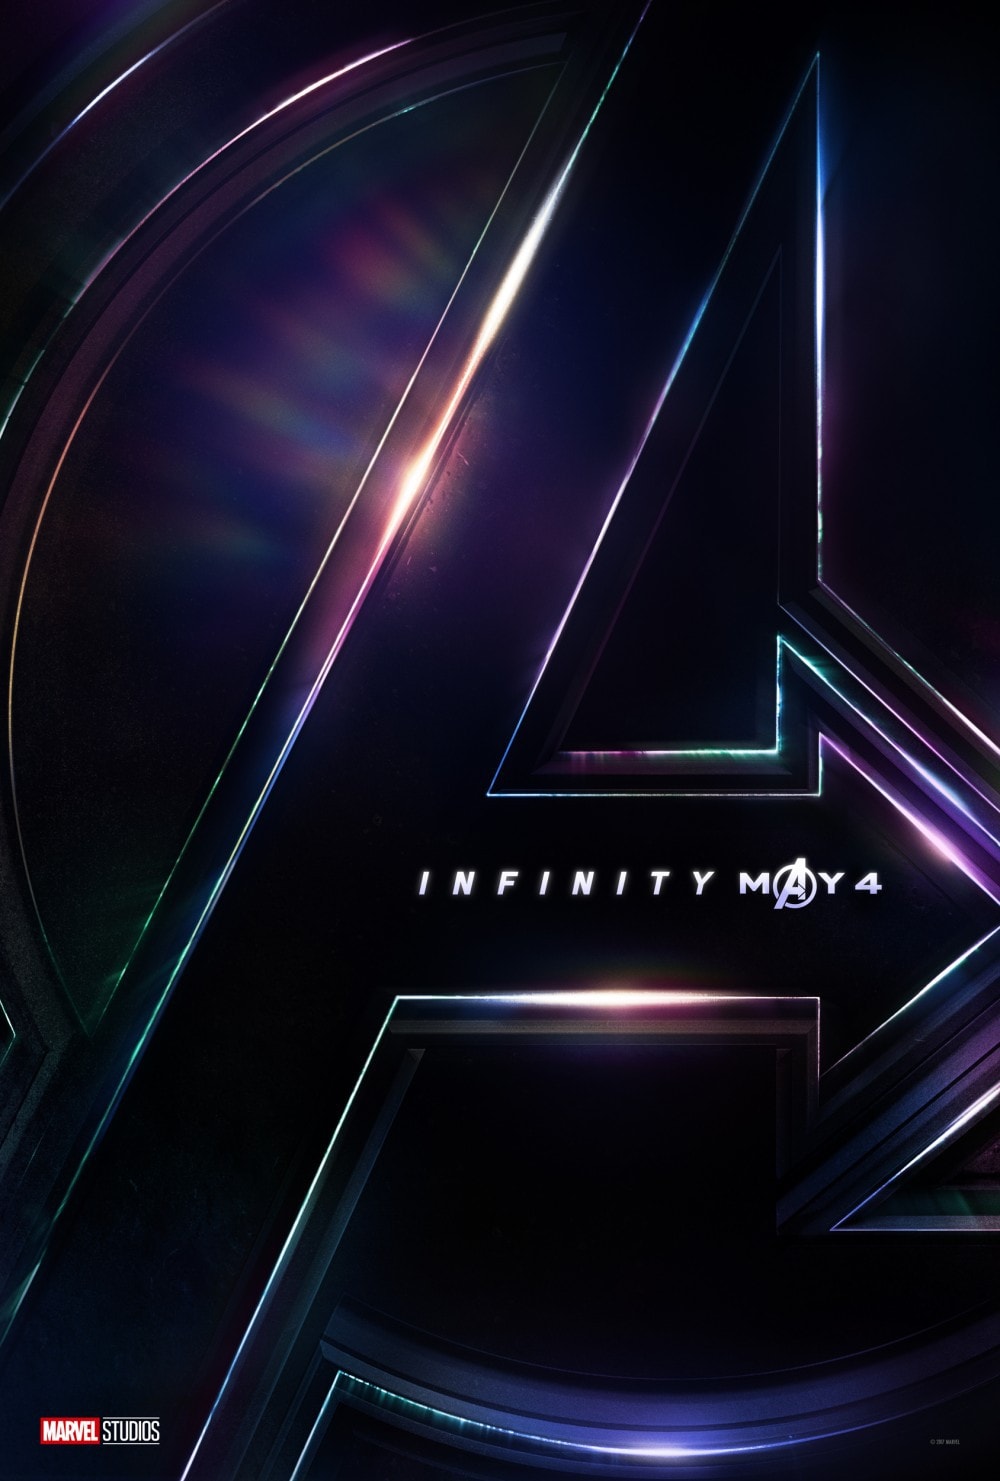 First Look Marvel Studios' AVENGERS: INFINITY WAR Teaser Trailer and Poster